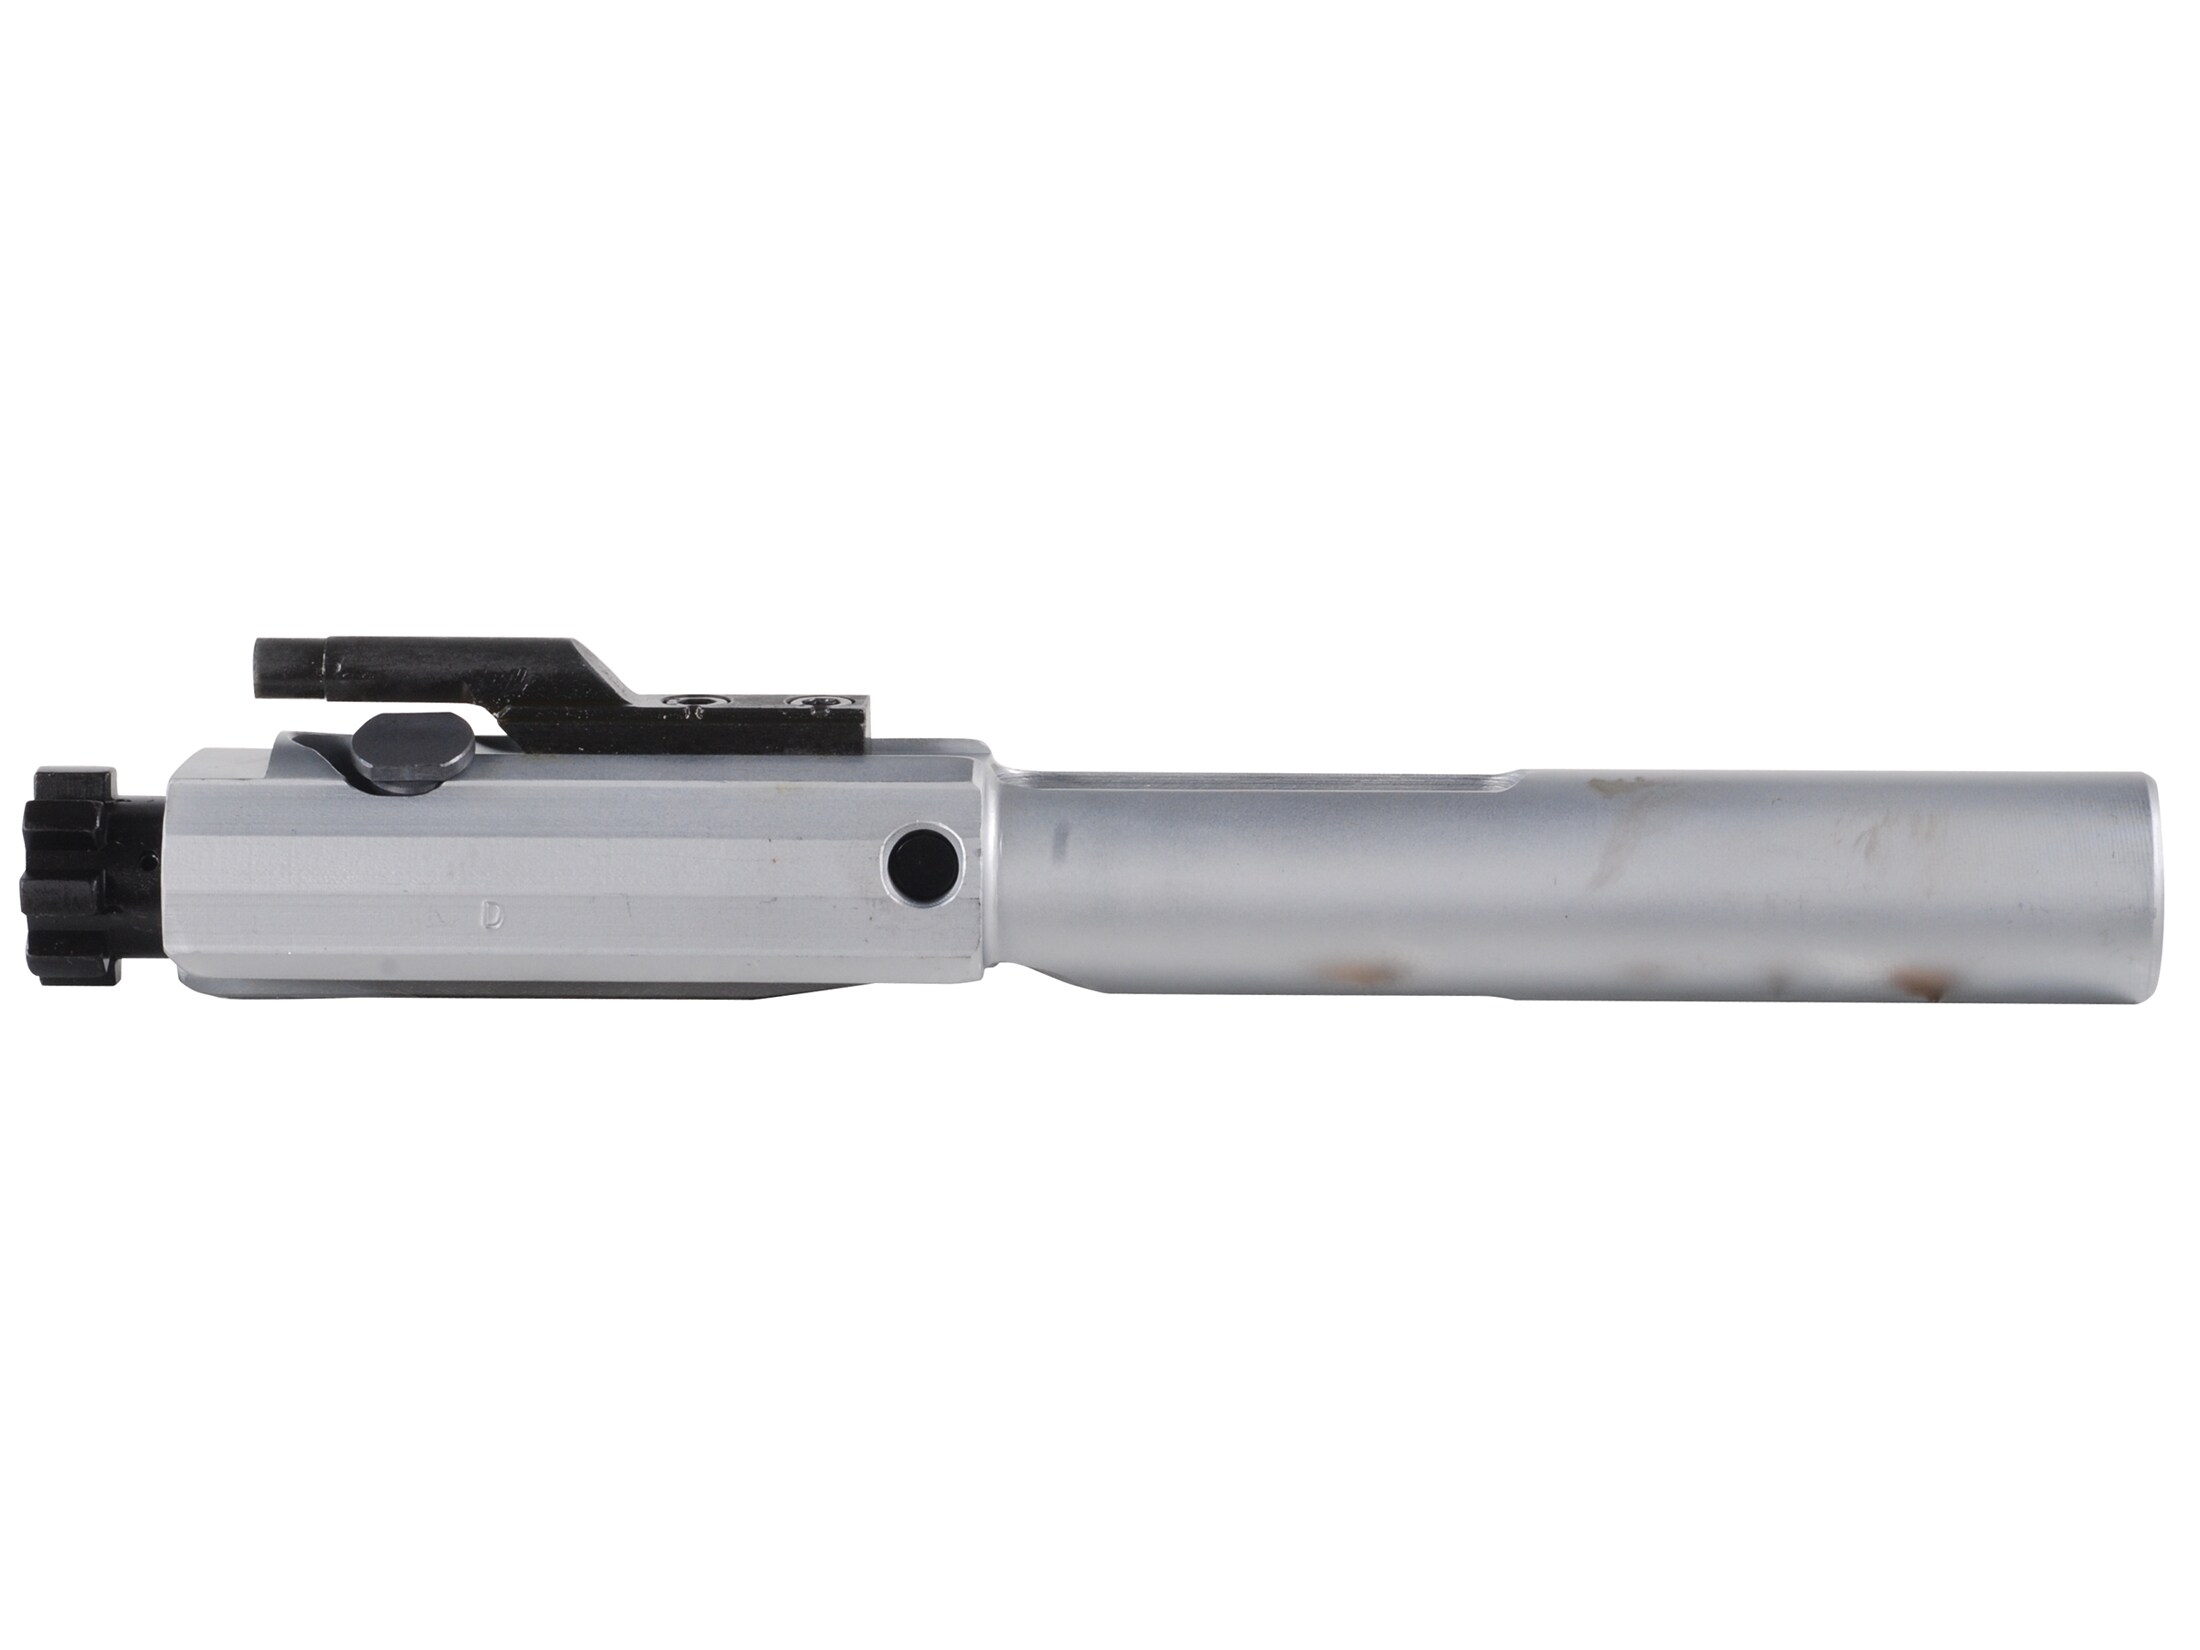 Factory replacement DPMS LR-308 bolt carrier assembly. 